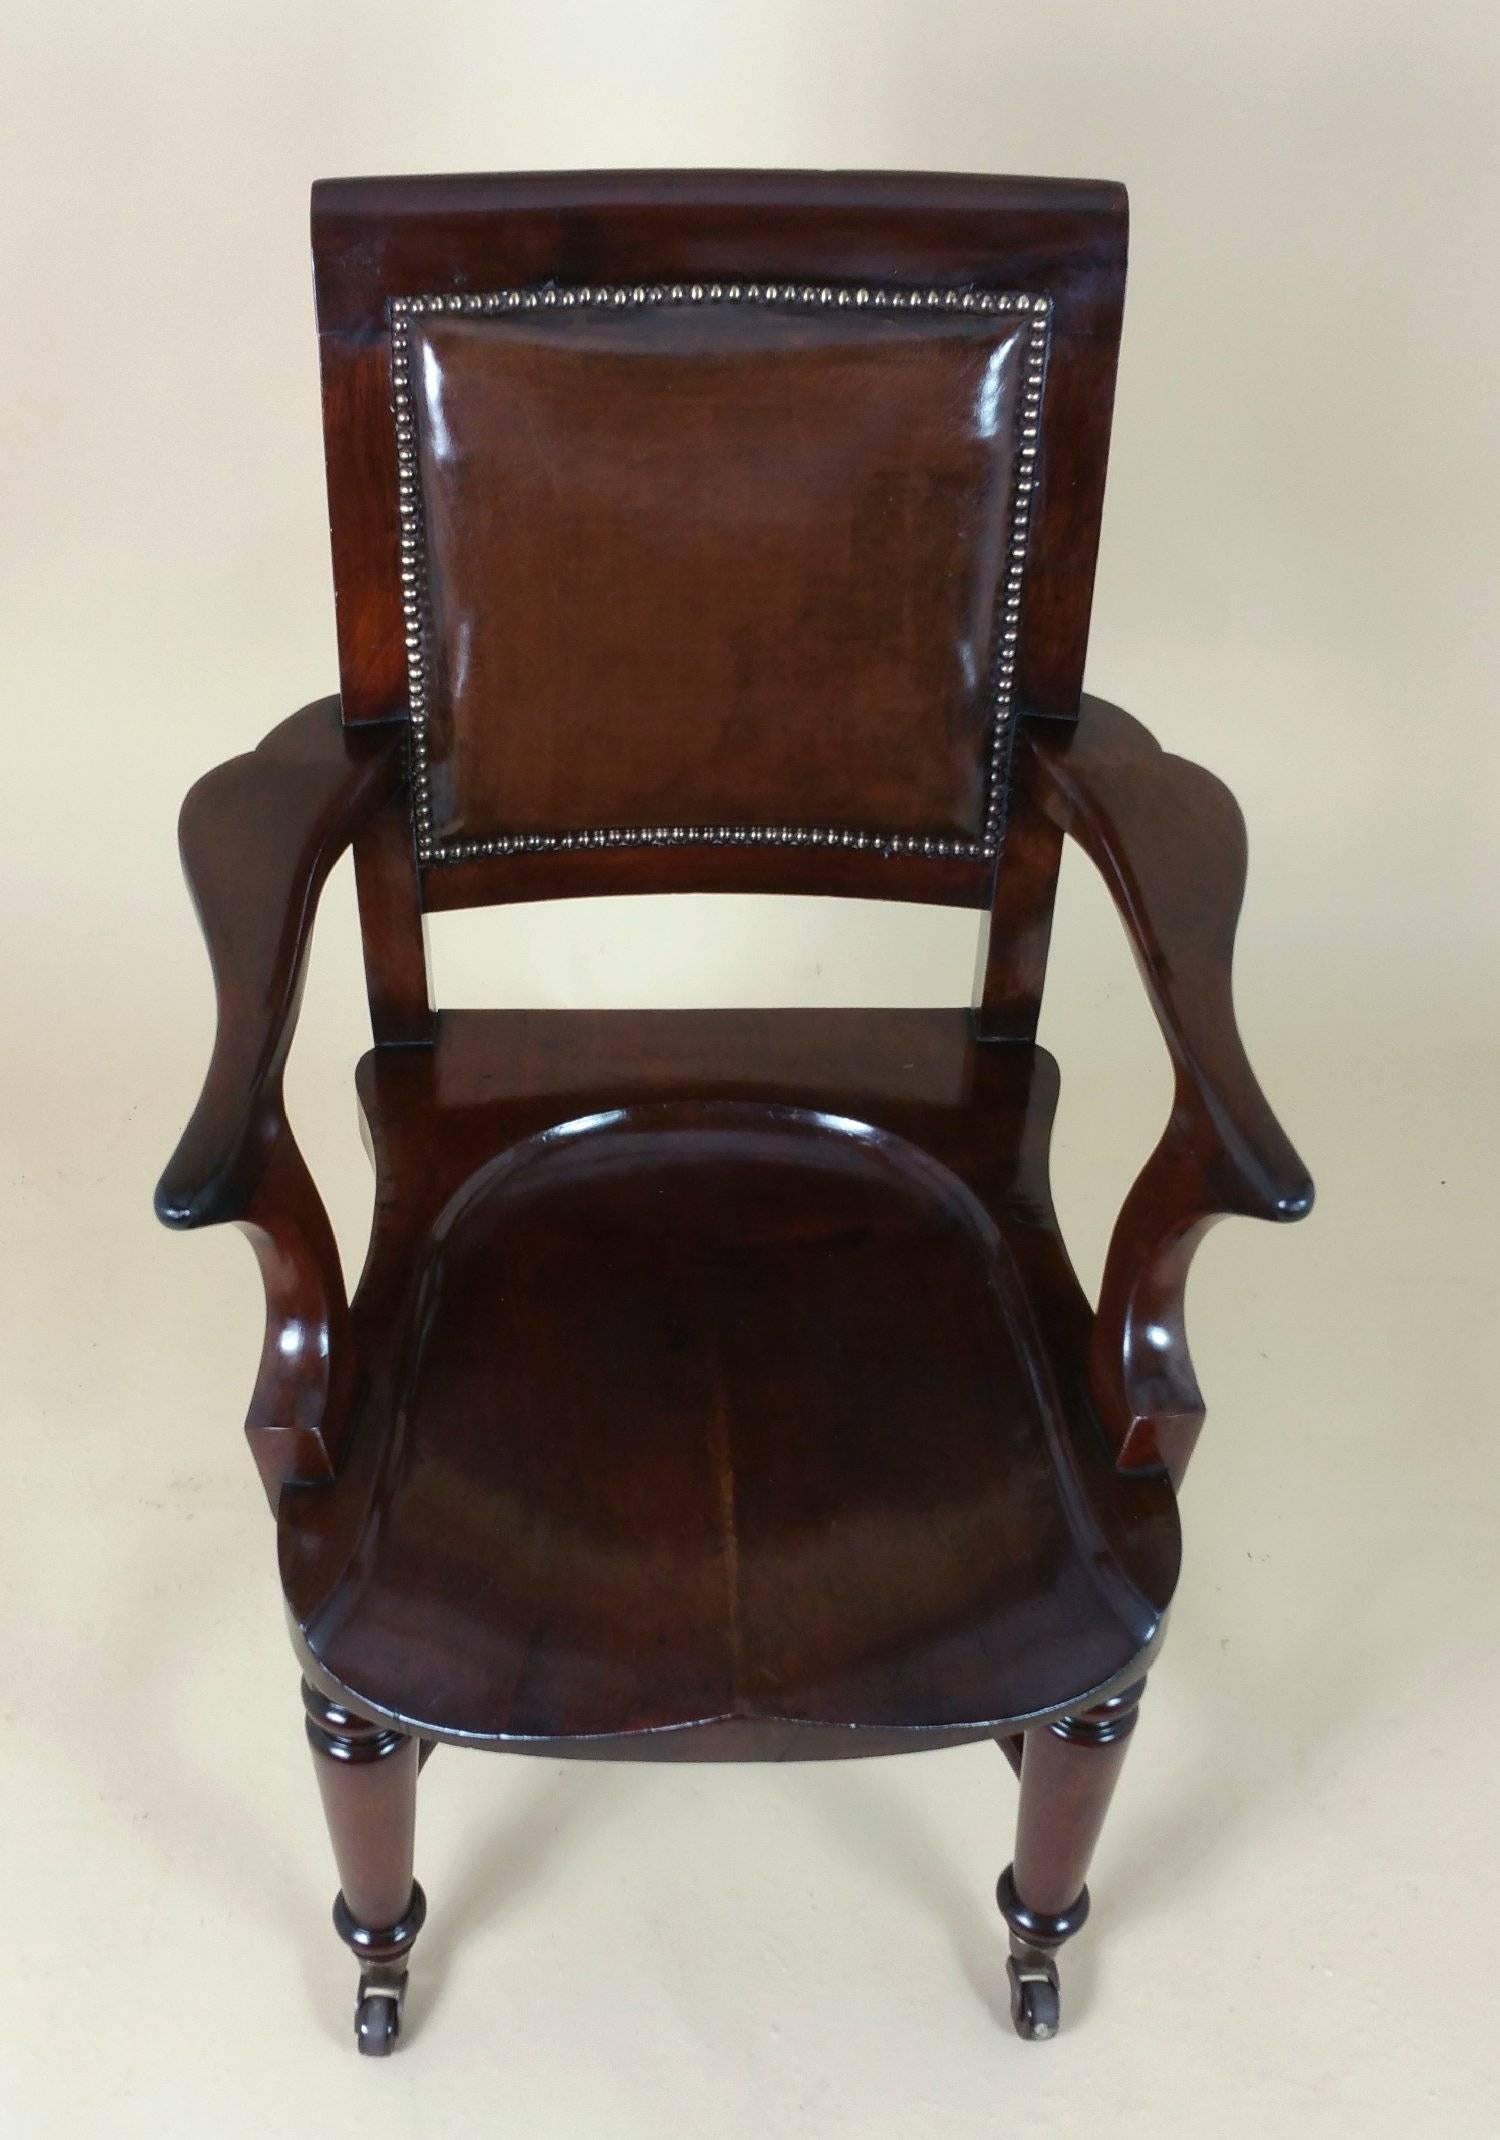 English Victorian Mahogany Solid Seat Desk Chair with Leather Back